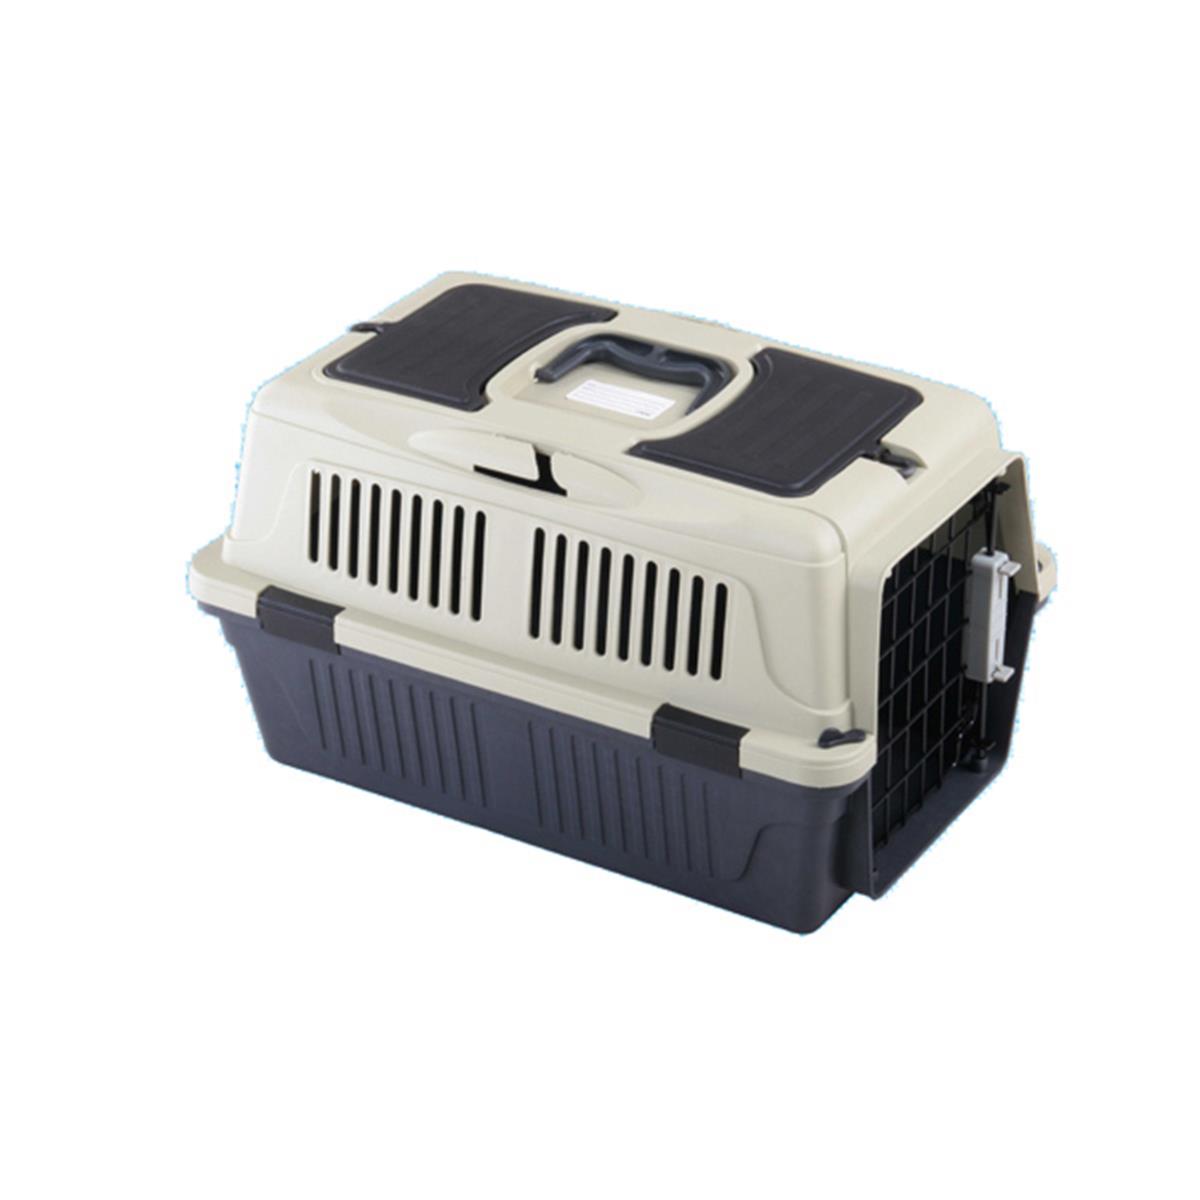 Picture of A&E Cage CD2-1 Assorted 20 x 13 x 13 in. Deluxe Pet Carrier with Seat Belt Holder - Case of 6